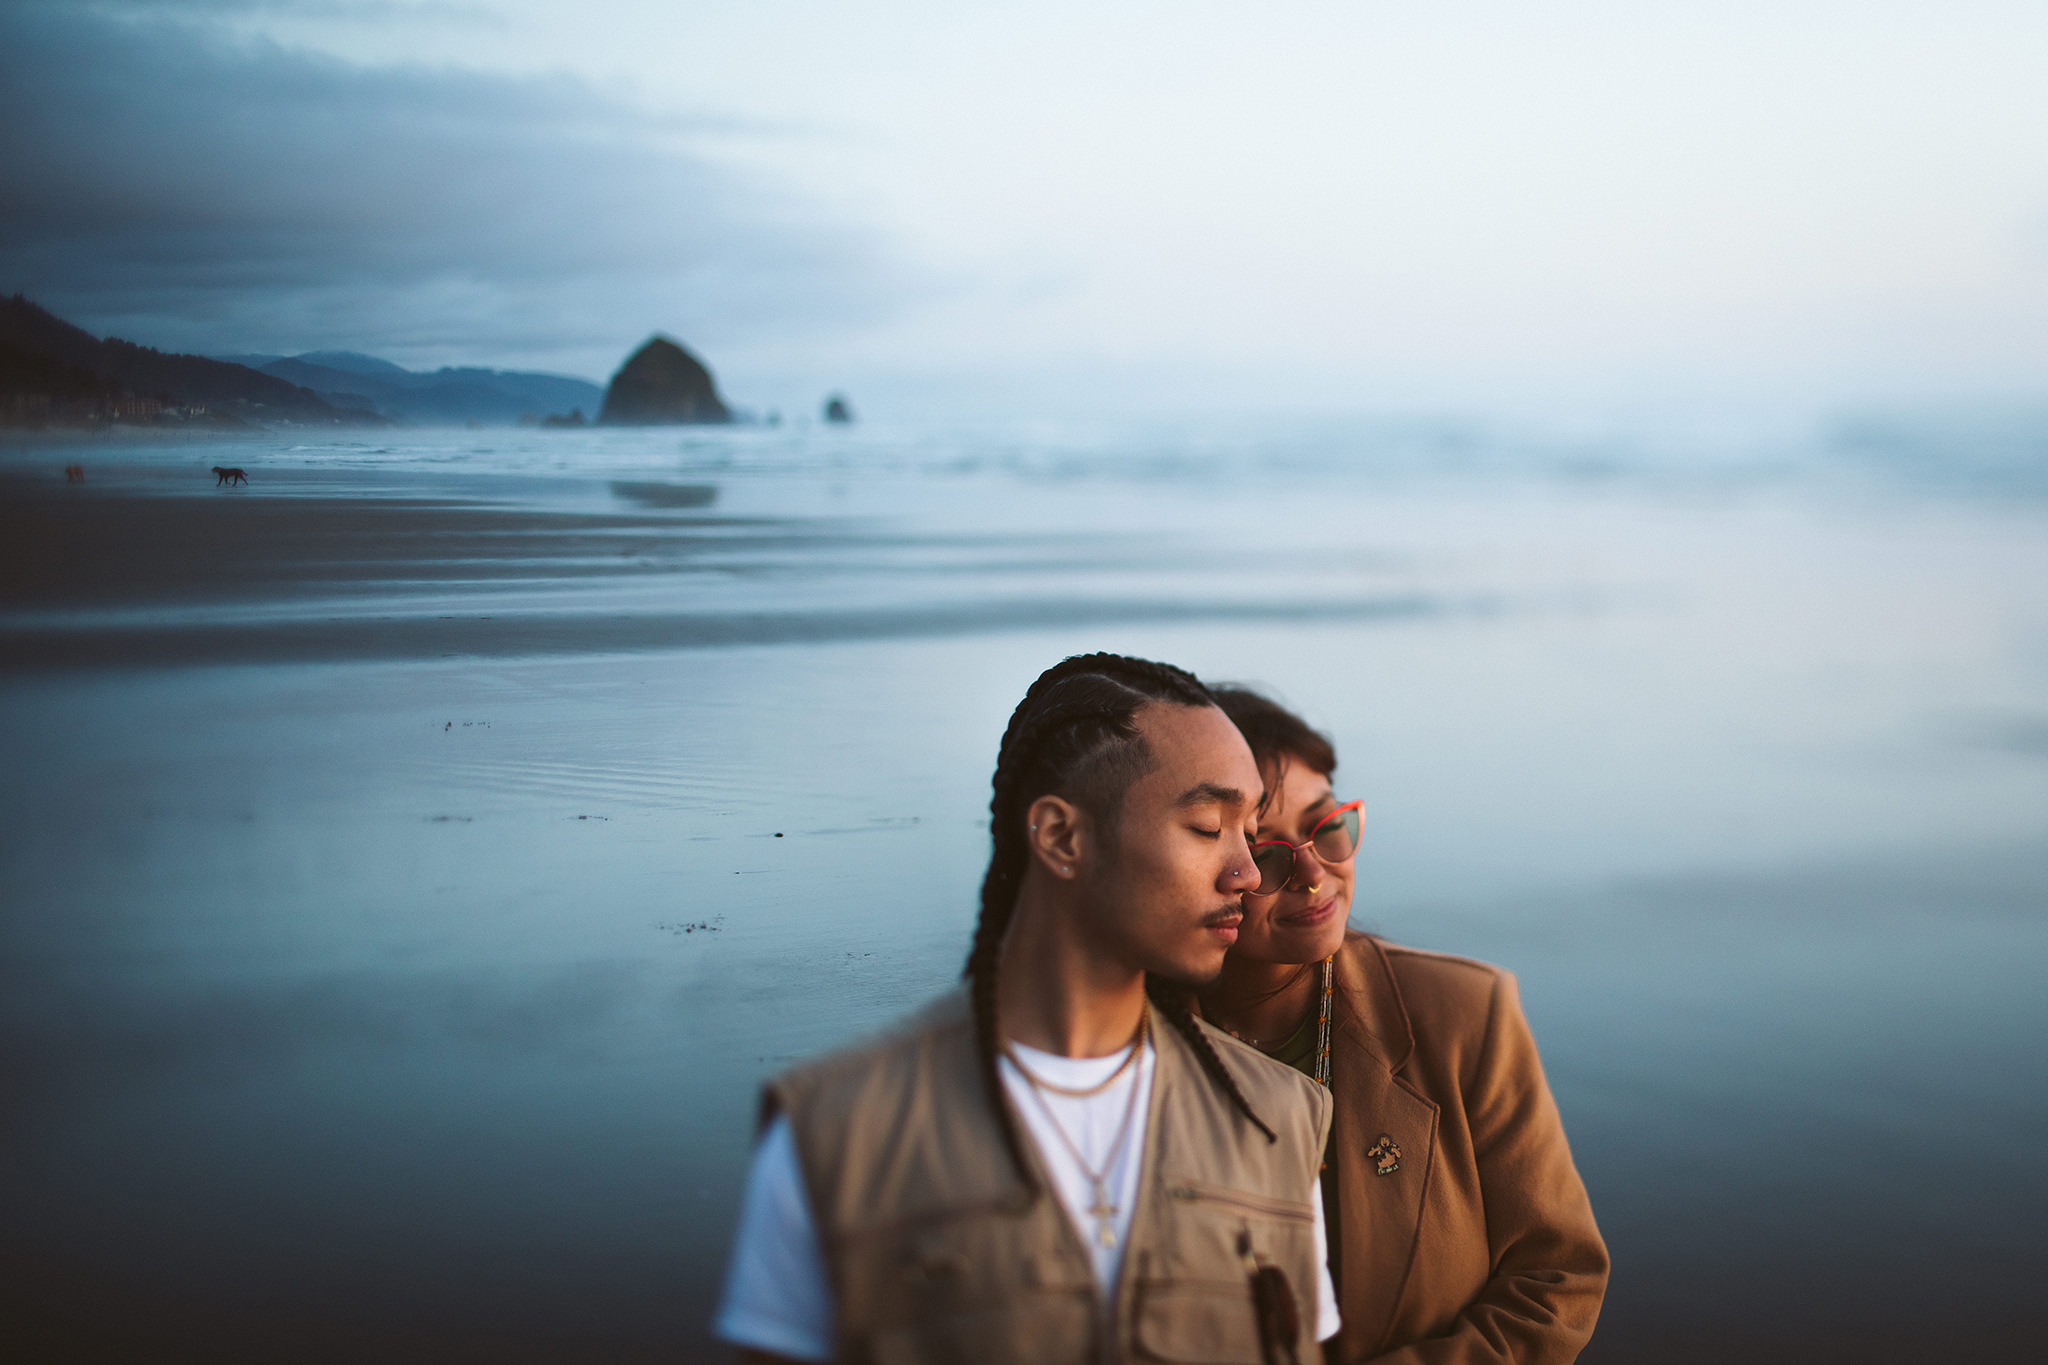 A moody engagement photo at dusk on Cannon Beach